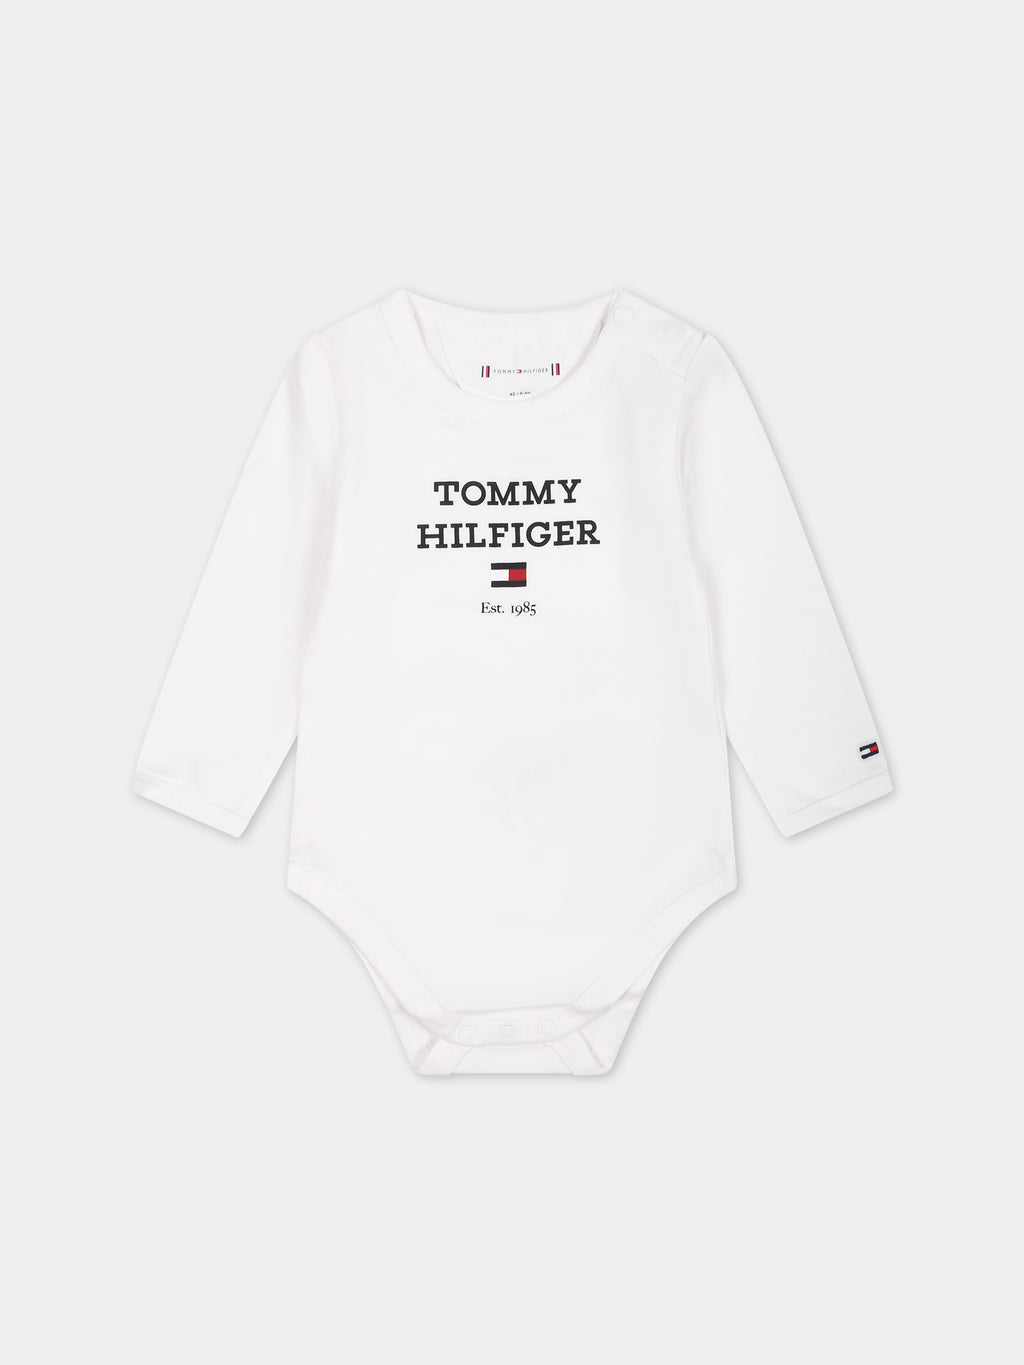 White bodysuit for babies with logo